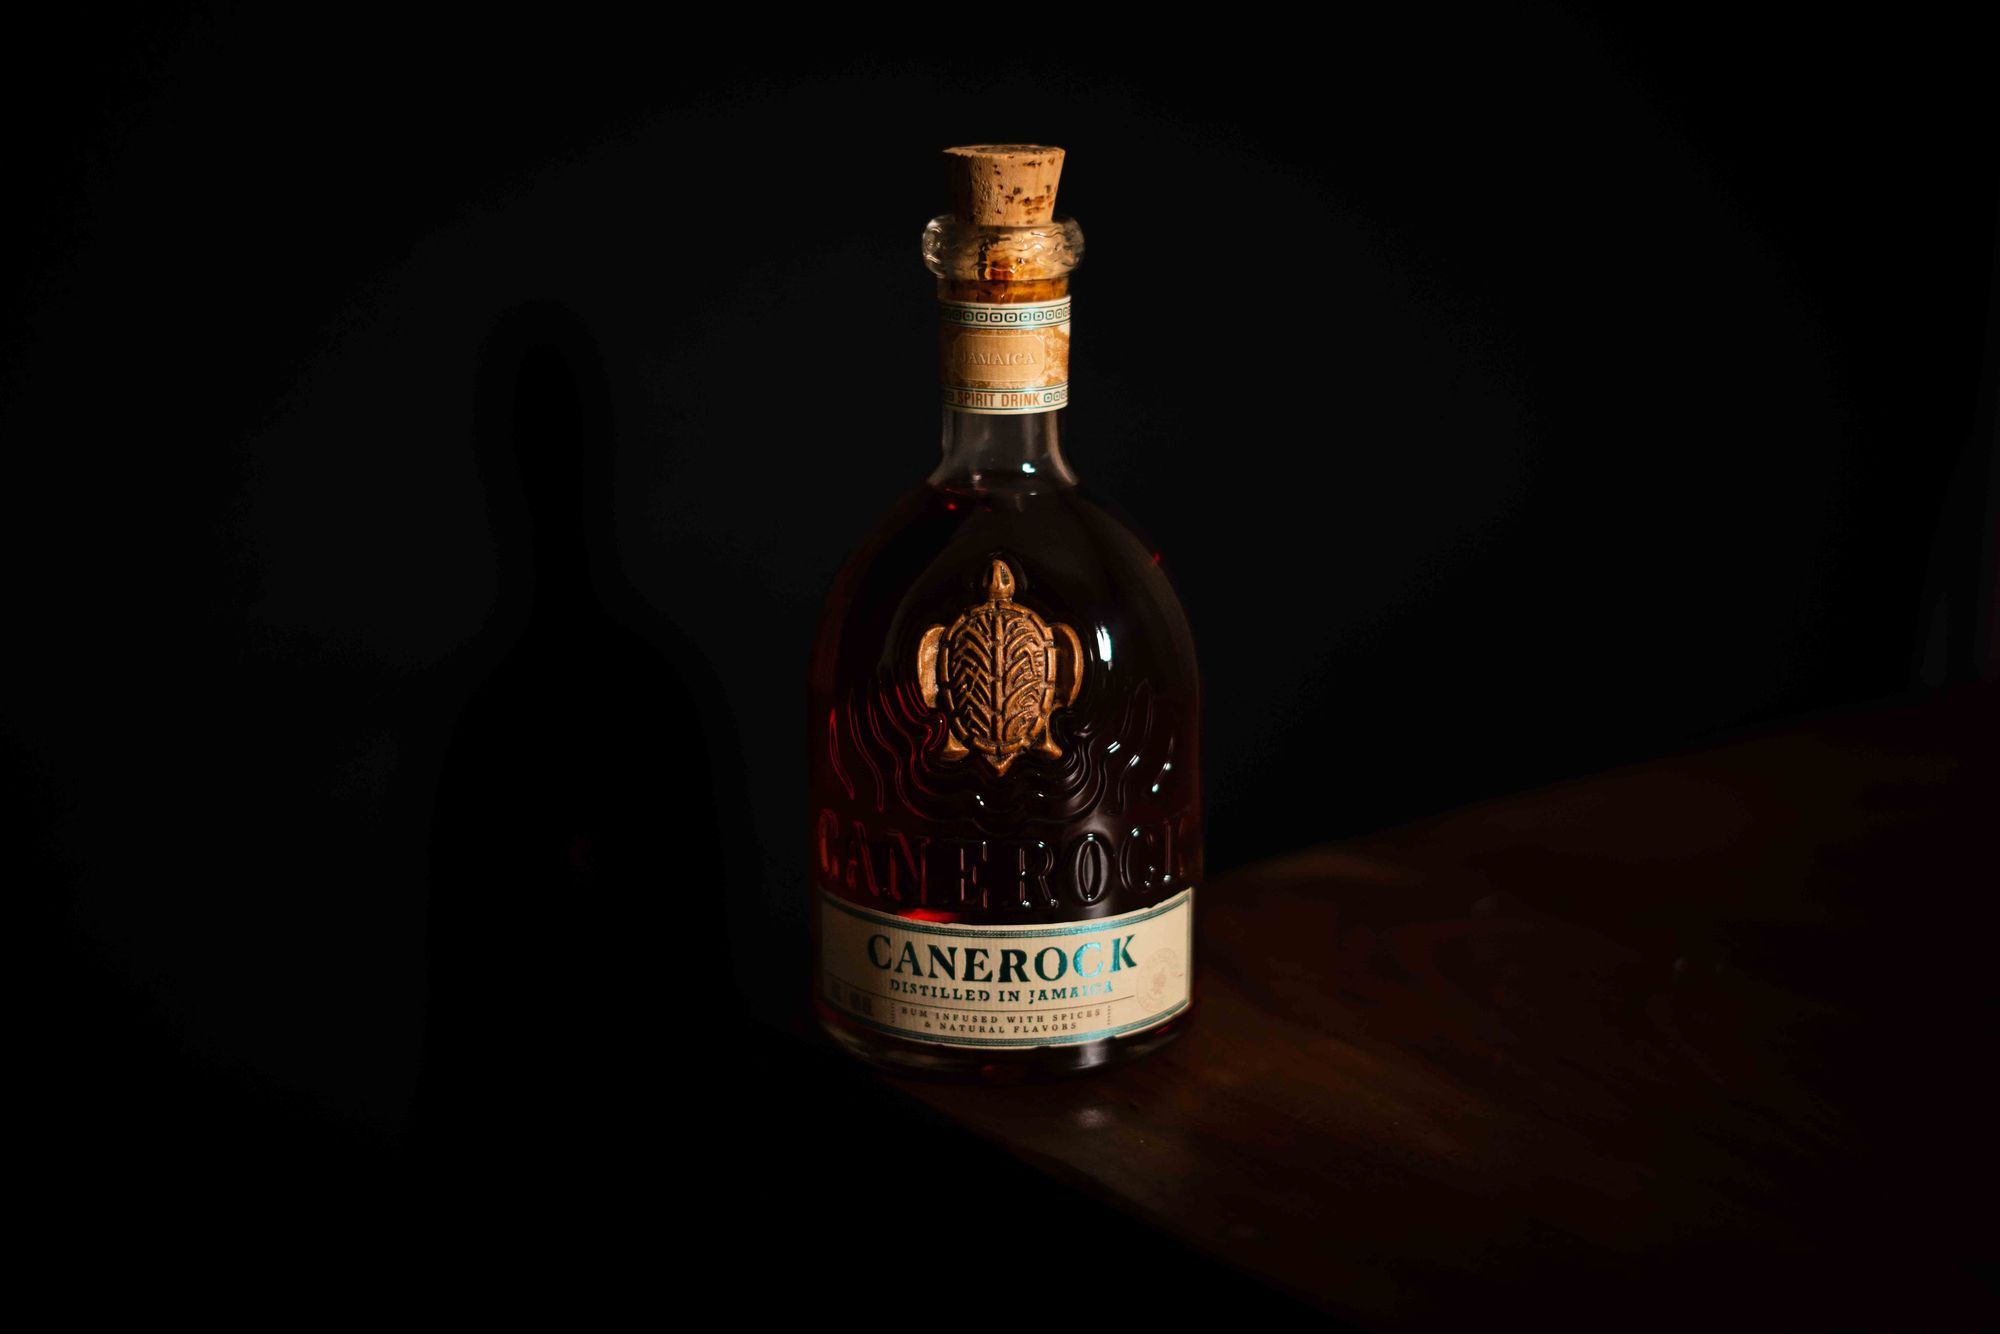 What is Canerock? Inside the new spiced rum release from Maison